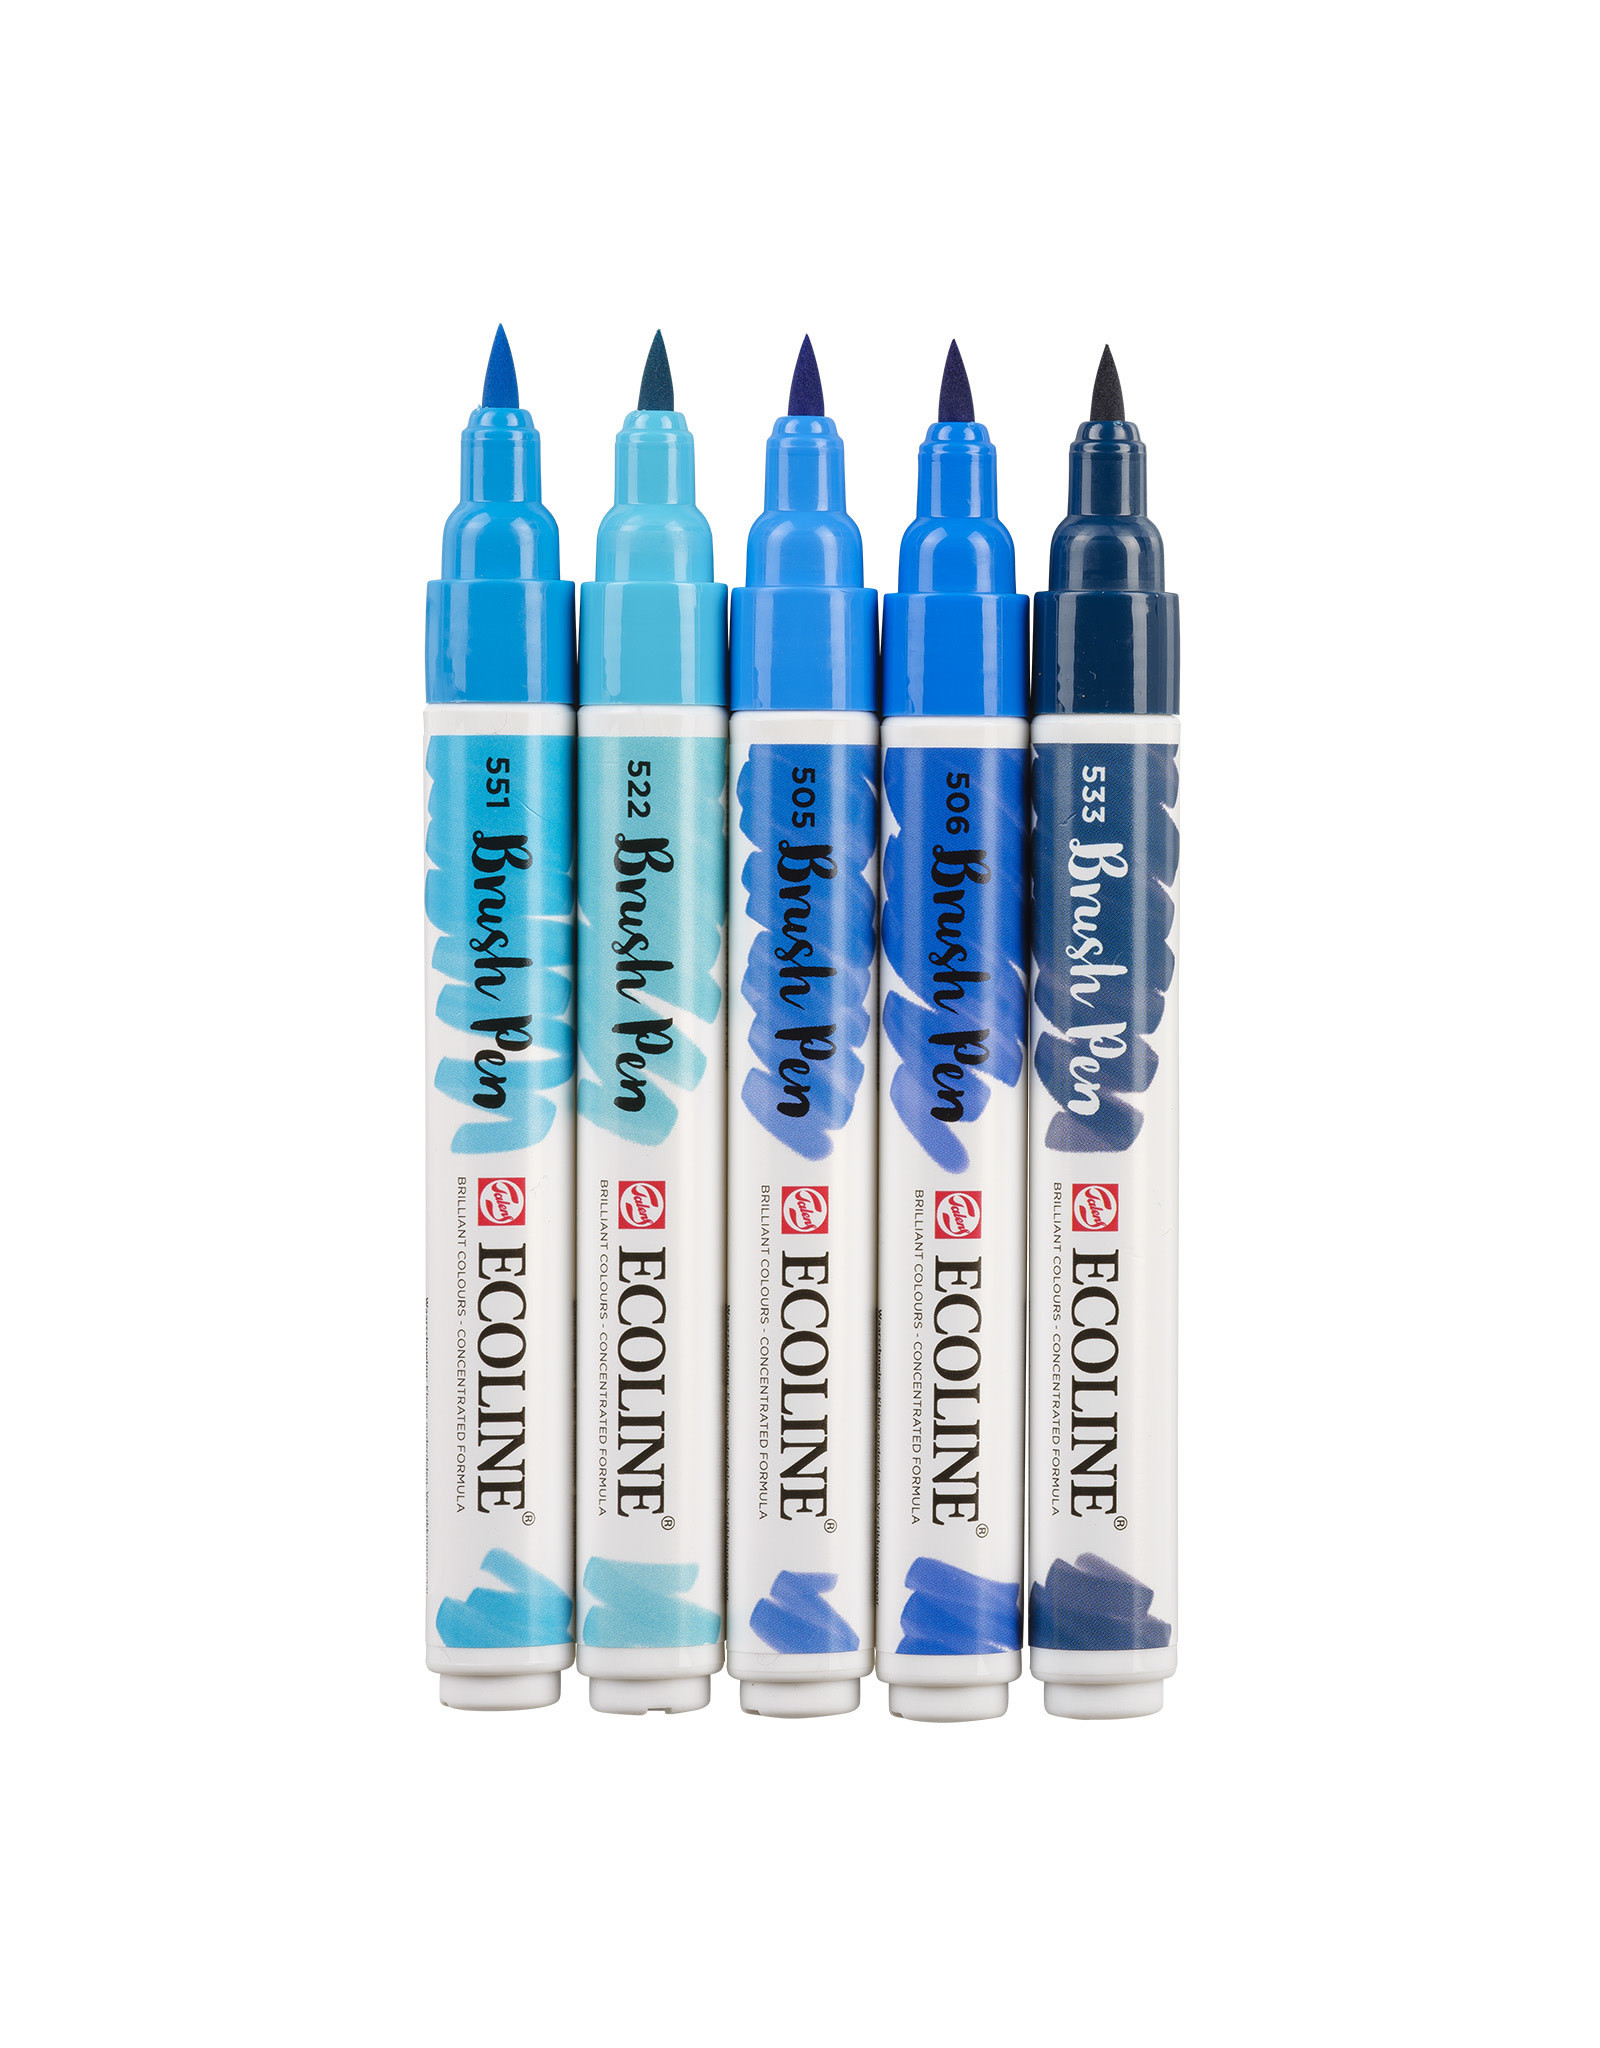 Royal talens Ecoline Brush Pens Article - STEP BY STEP ART